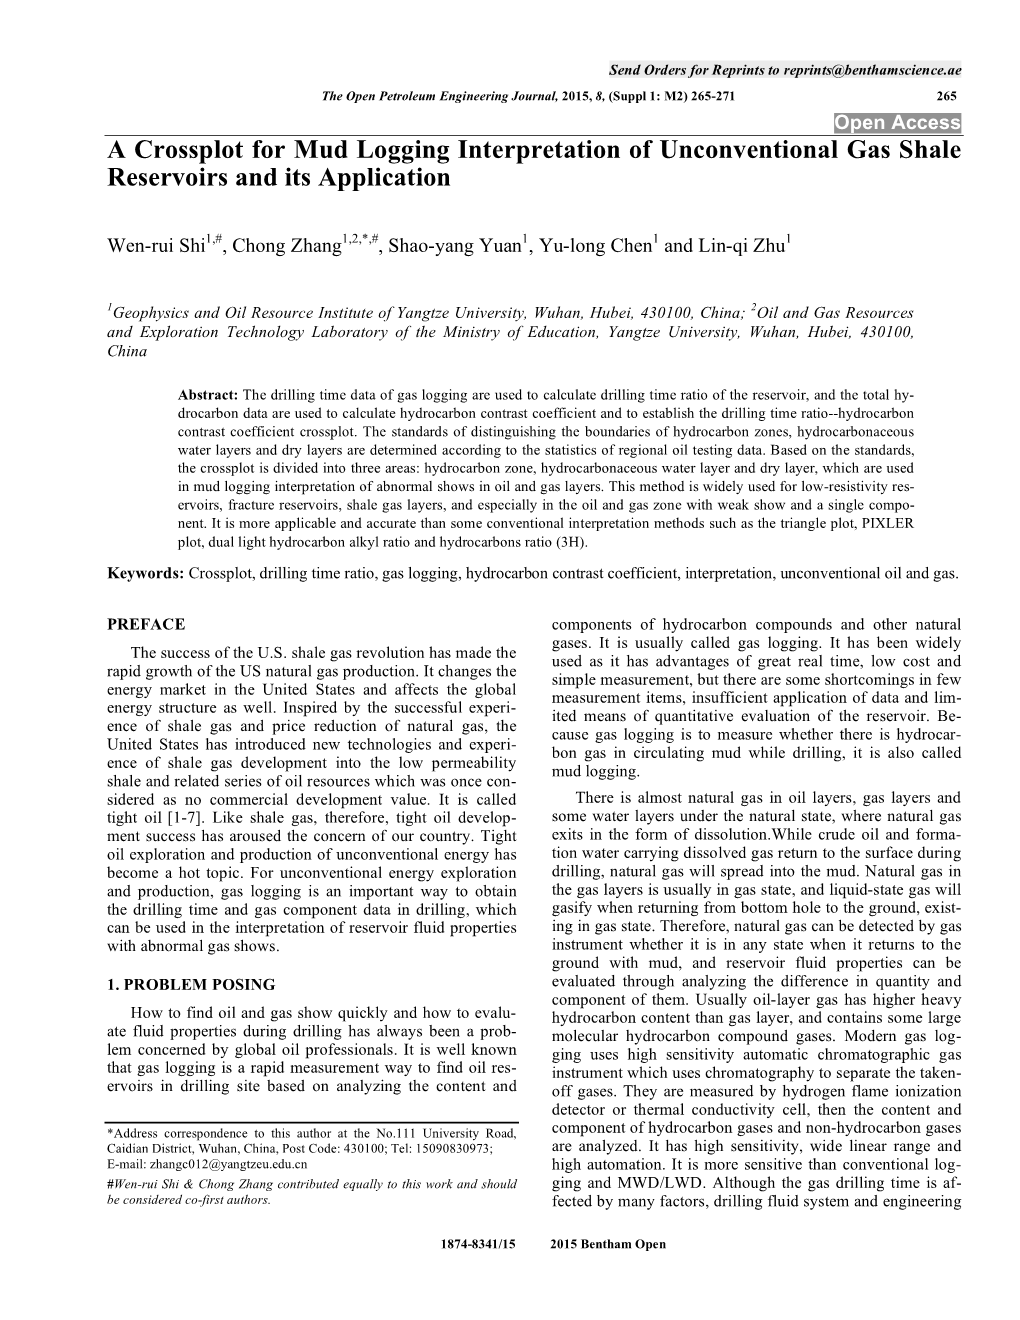 A Crossplot for Mud Logging Interpretation of Unconventional Gas Shale Reservoirs and Its Application